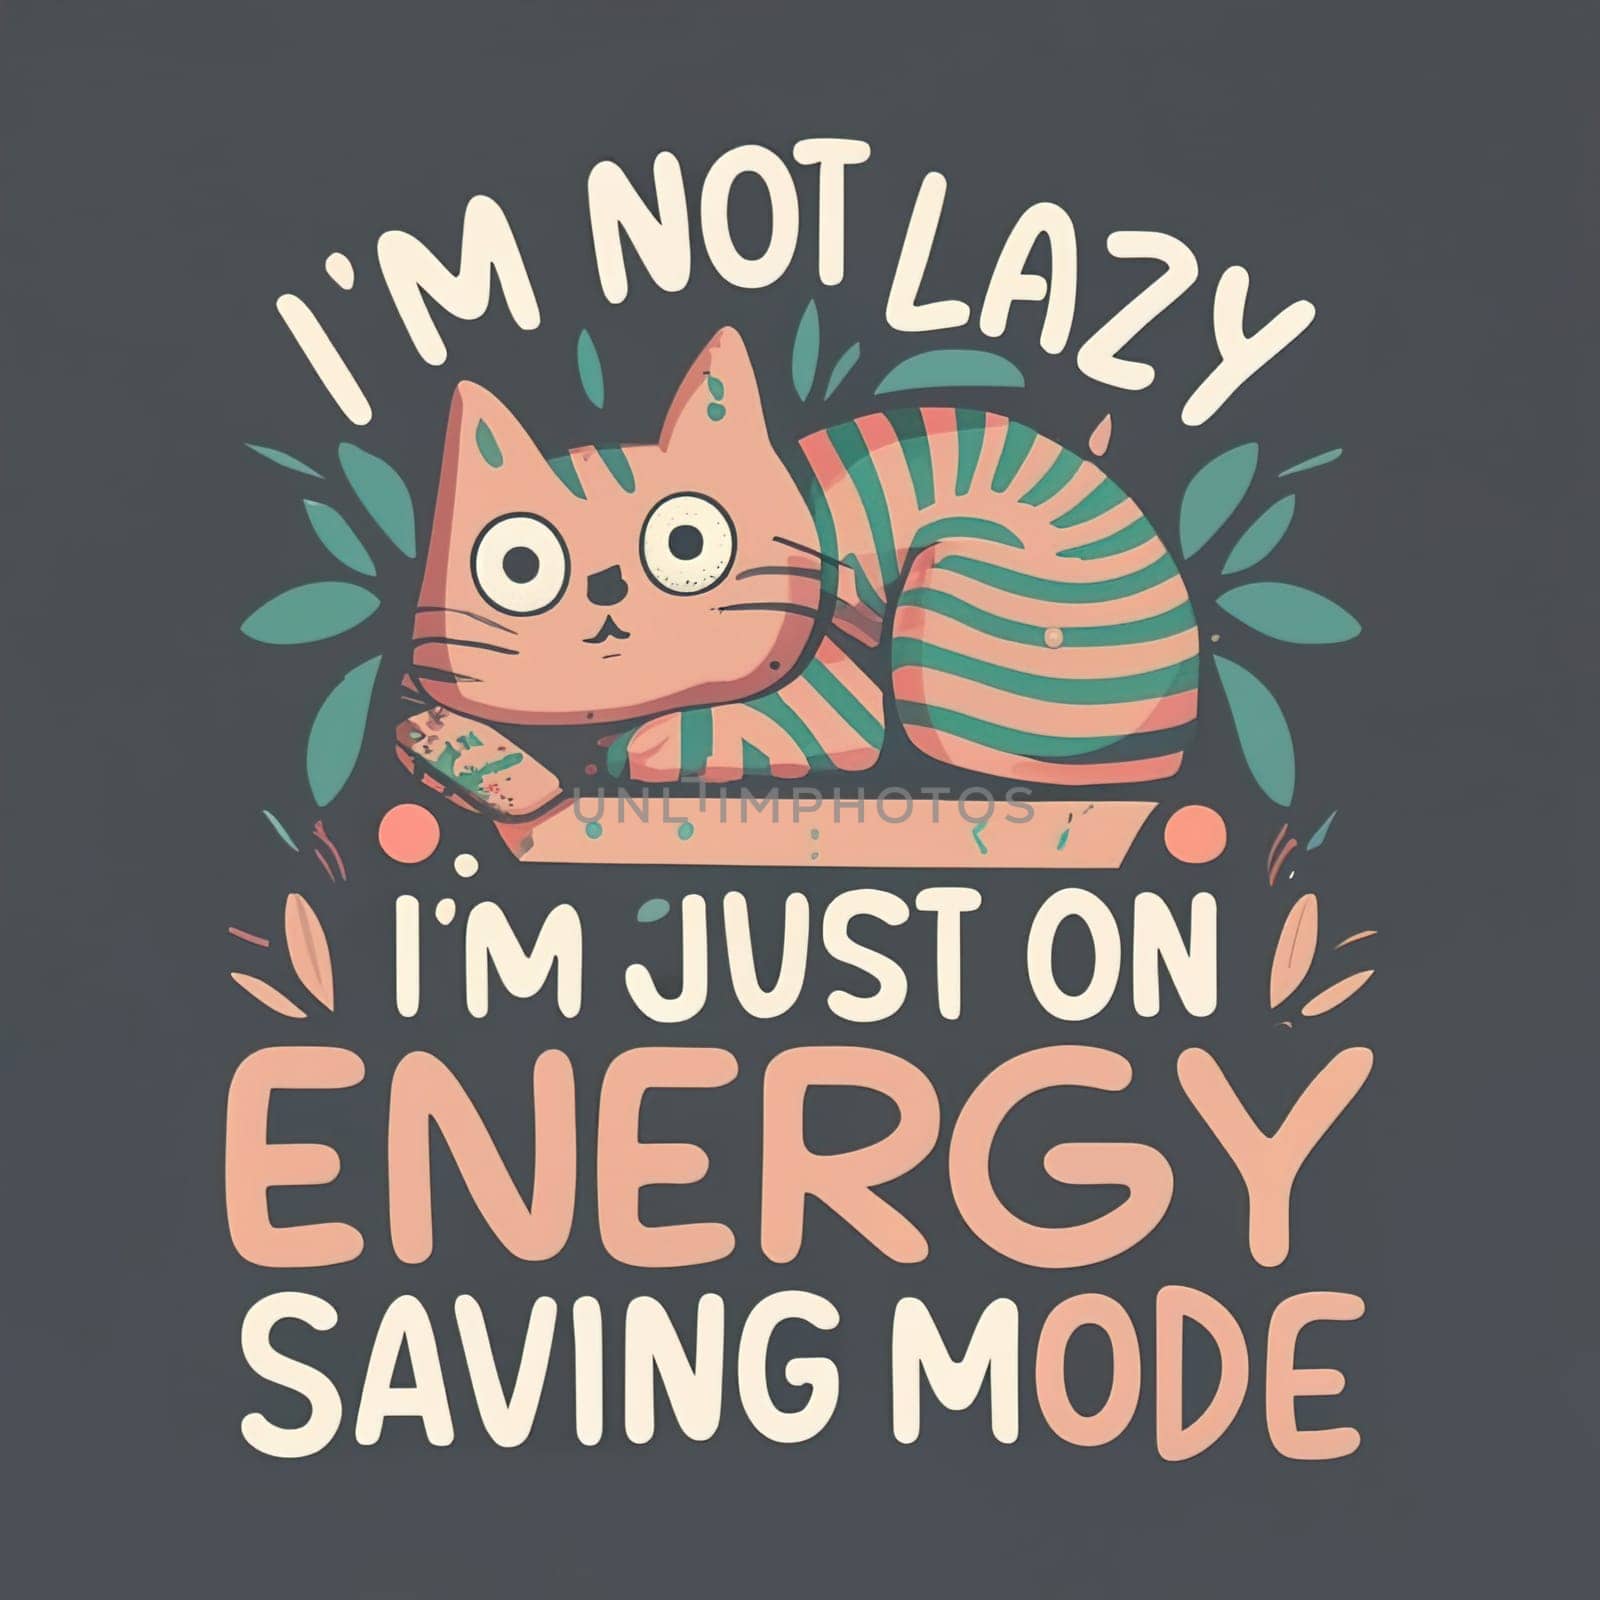 Cat under Im Not Lazy Im Just on Energy-Saving Mode Text - Humorous Pet Illustration on Black Background download image